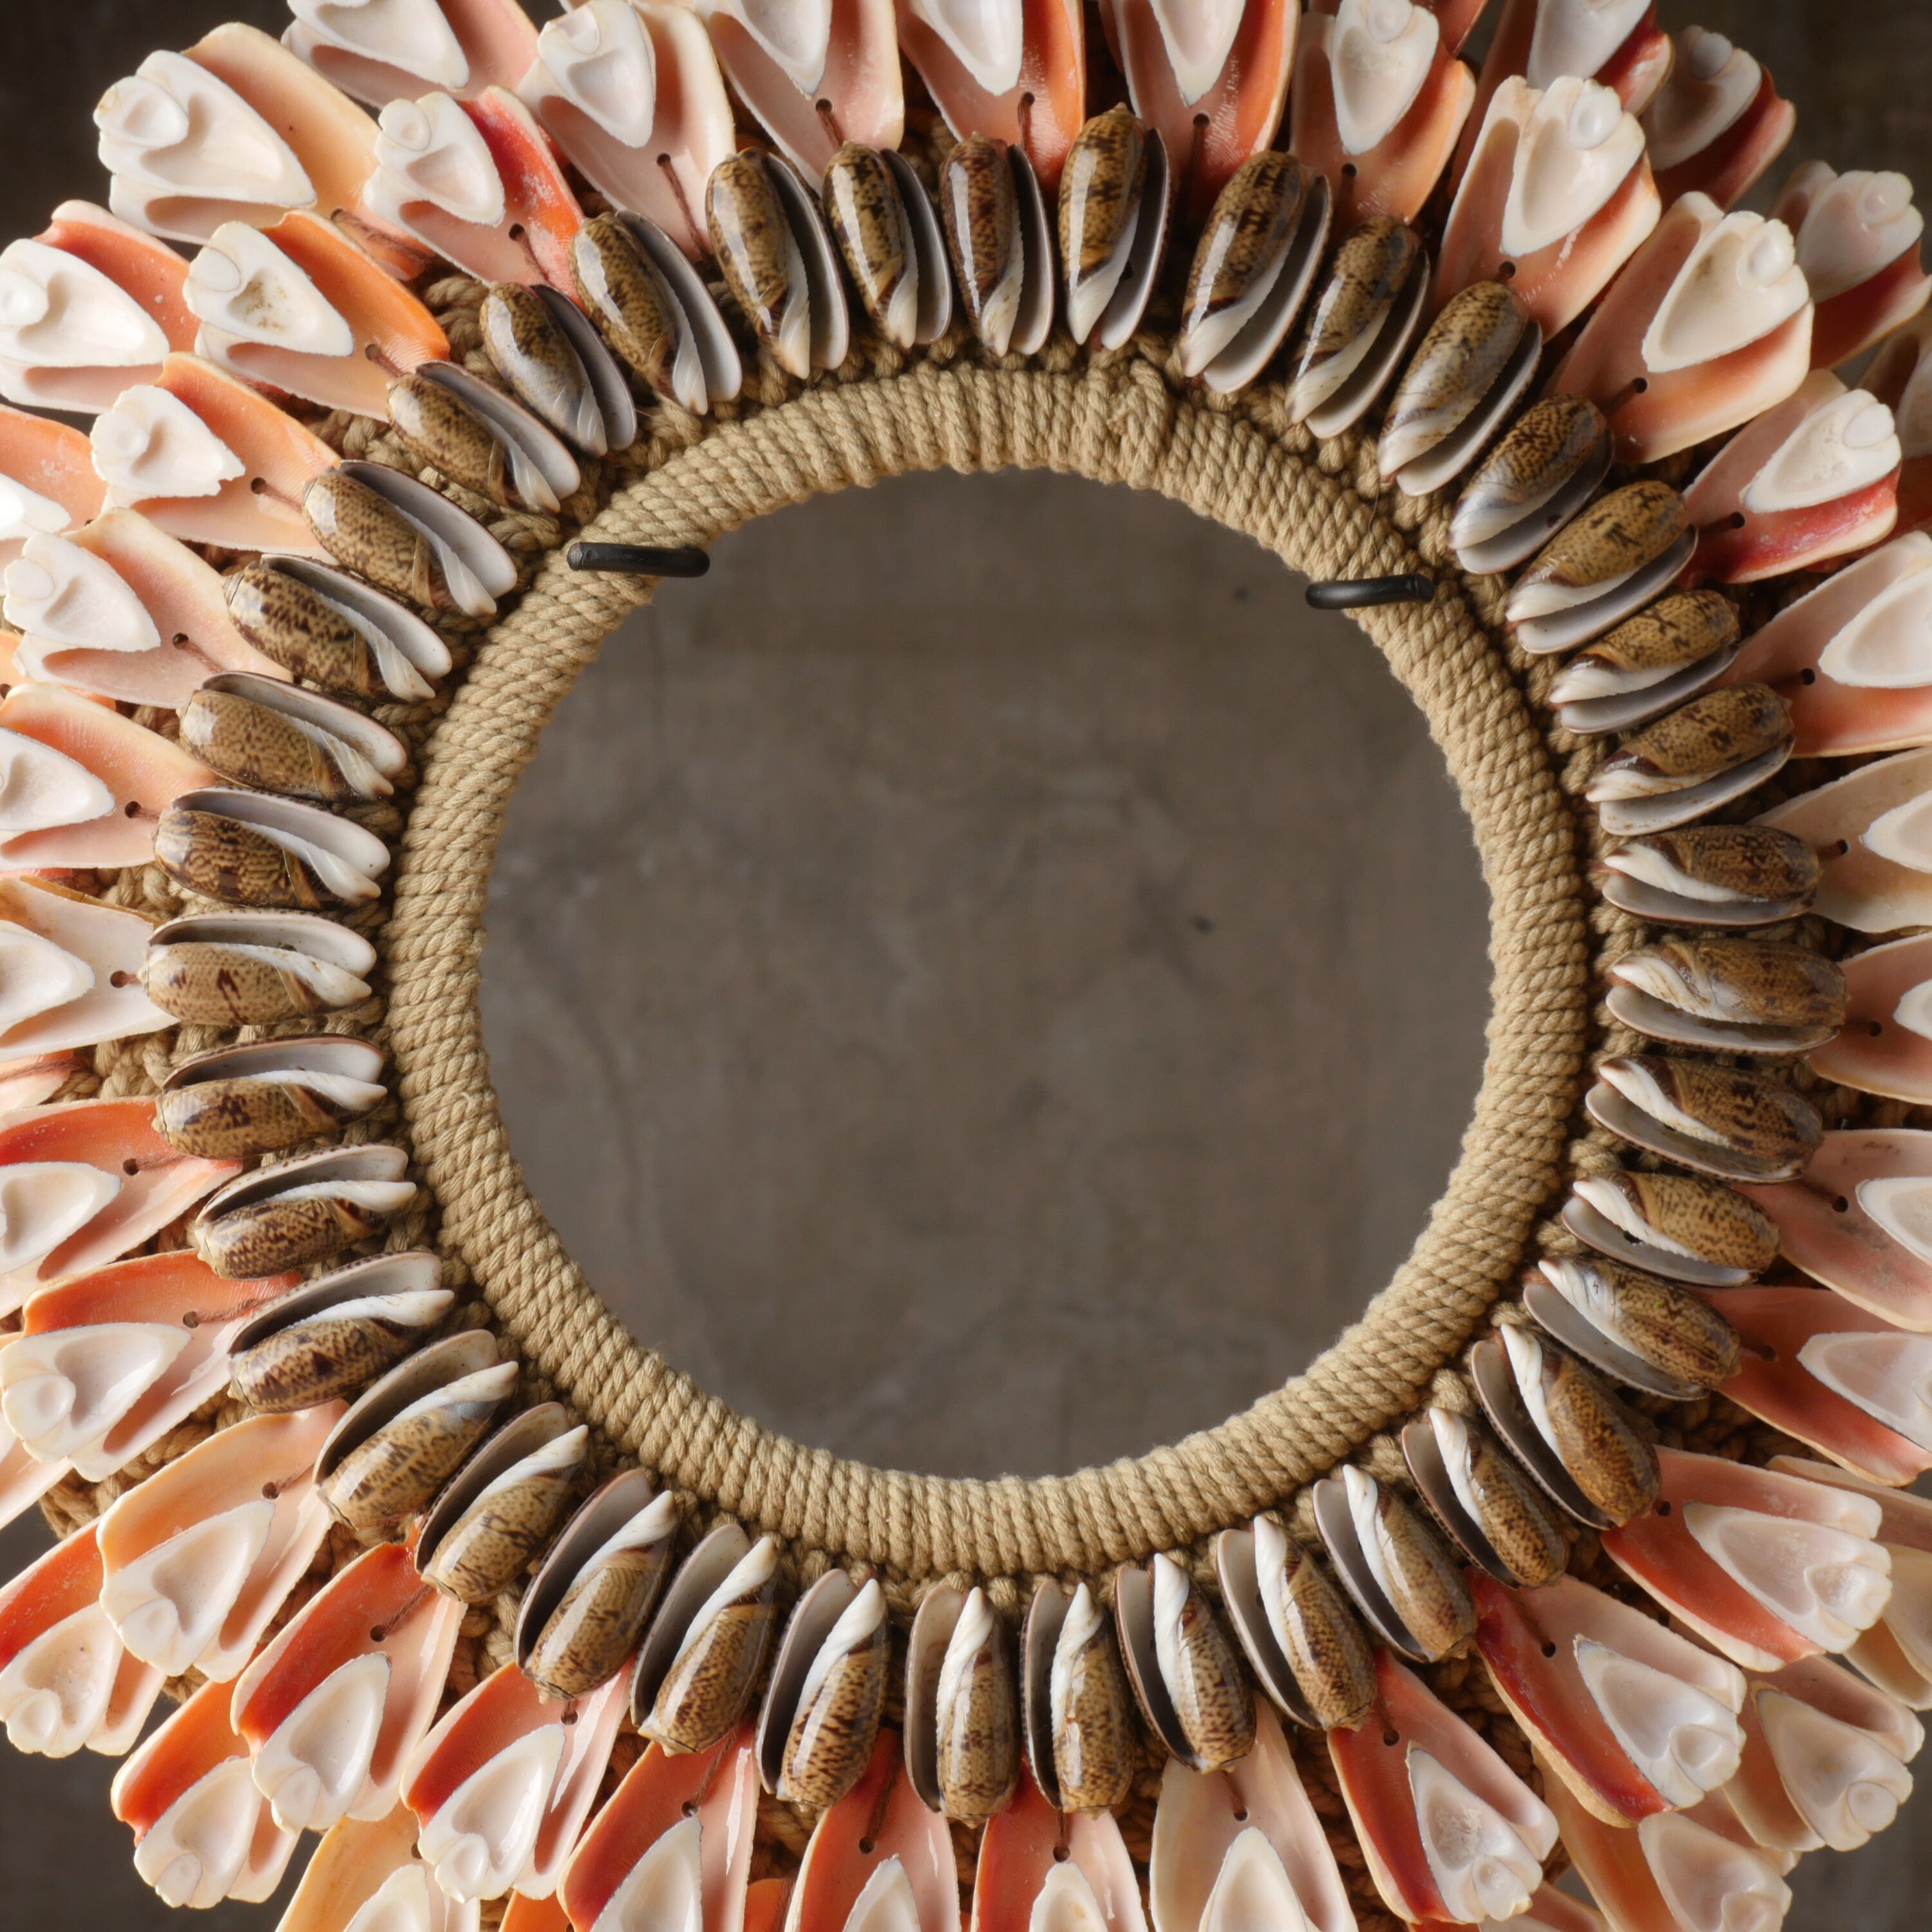 The Tiger Conch Necklace - Papua Necklace - Decorative Shell Necklace